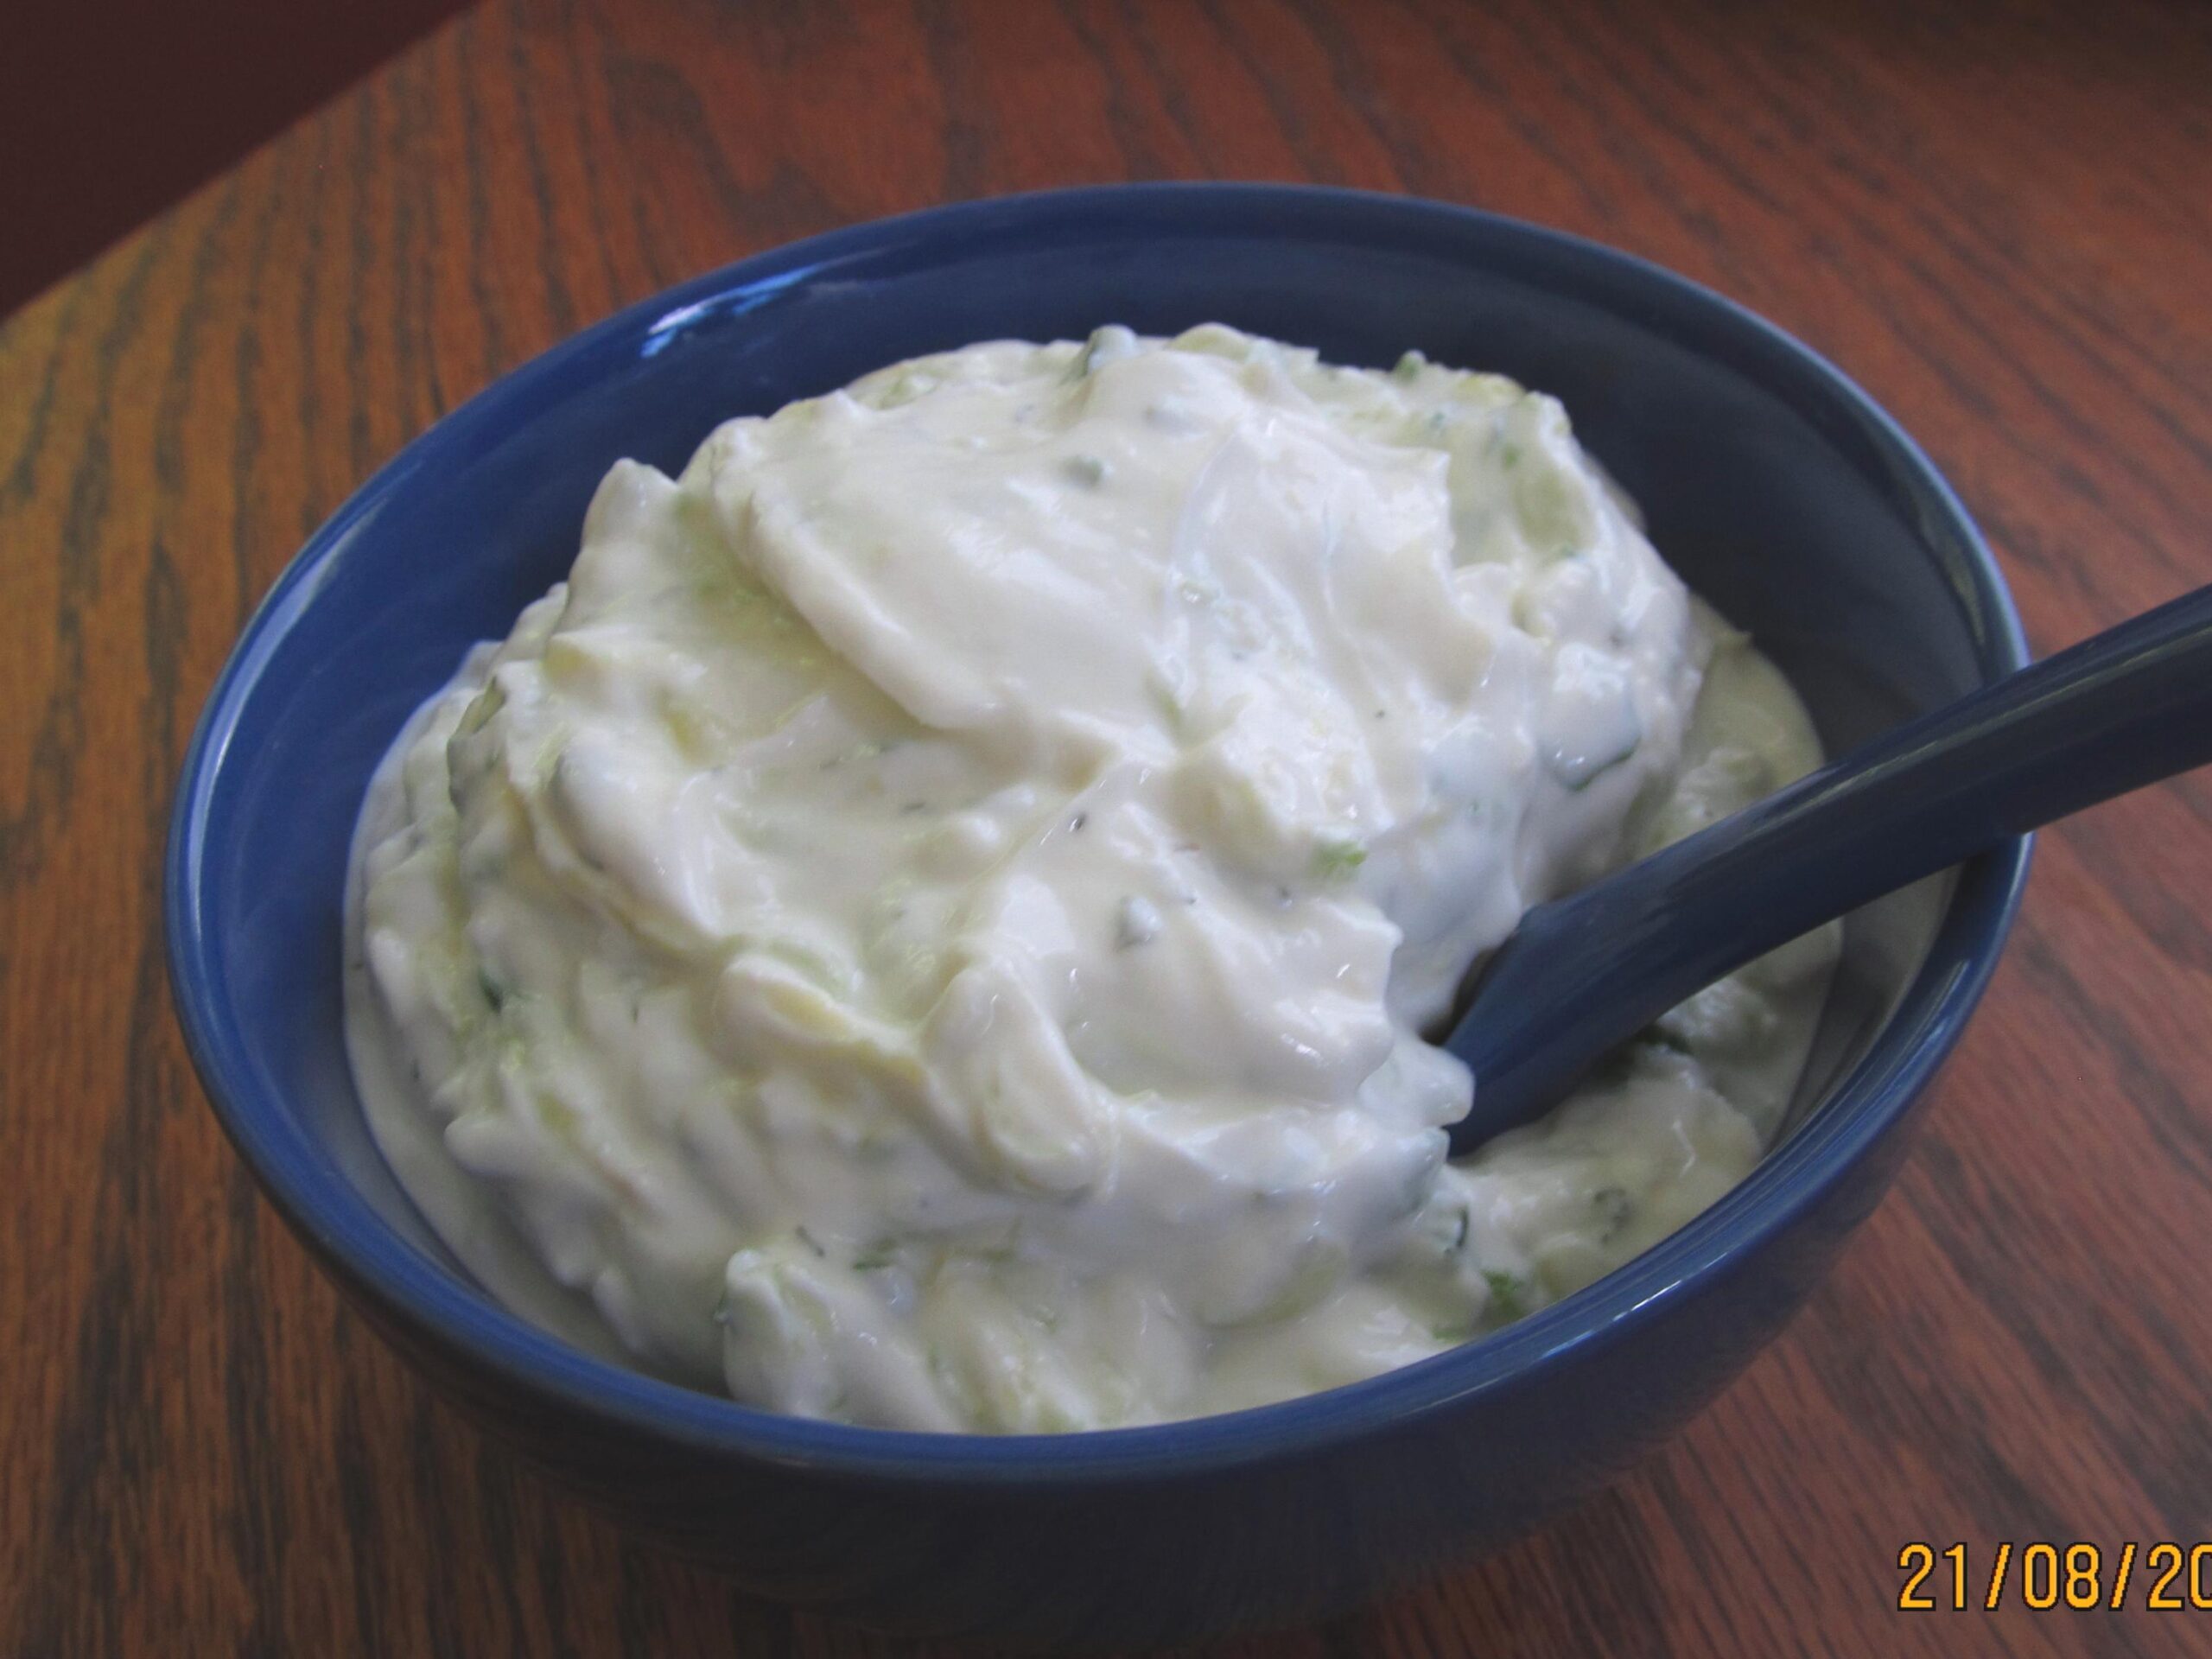  Add a dollop of coolness to your favorite dish with this tzatziki sauce.